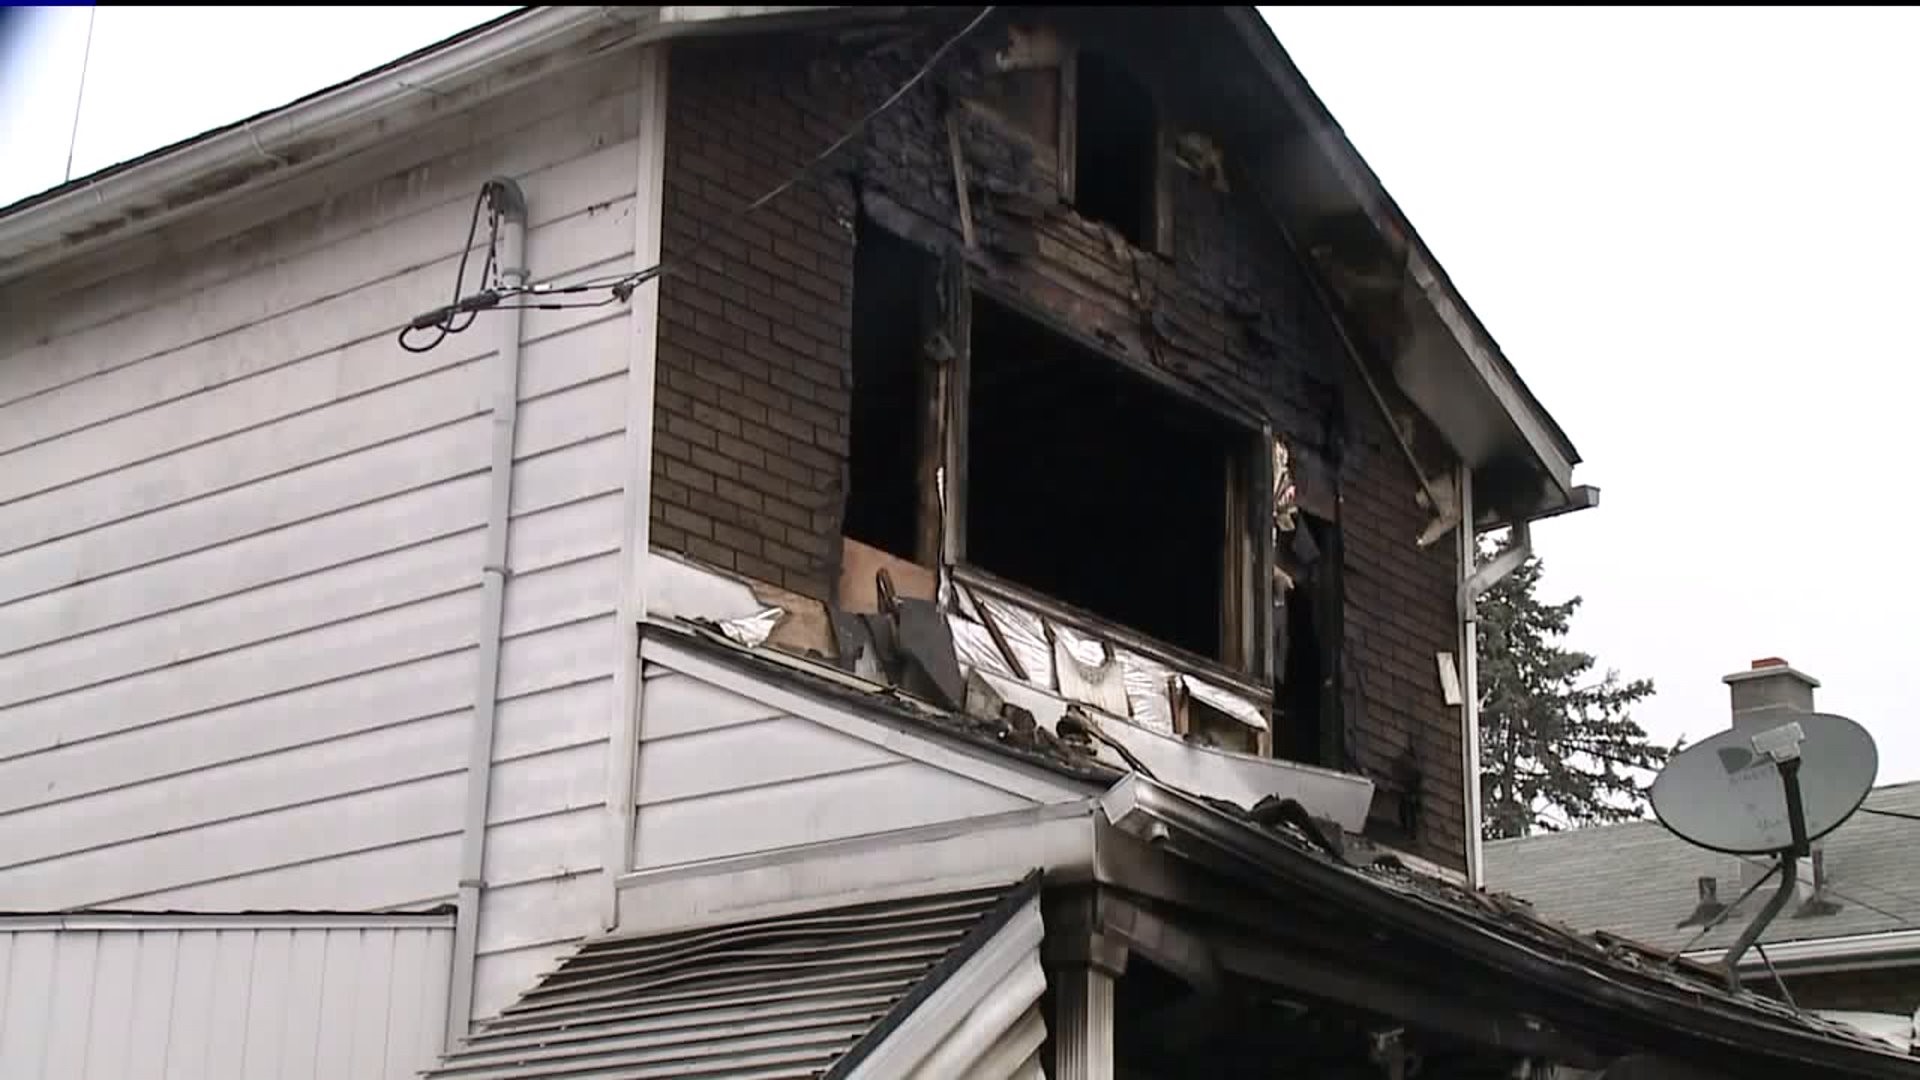 String of Fires on Small Street in Wilkes-Barre Has Neighbors Desperate for Answers